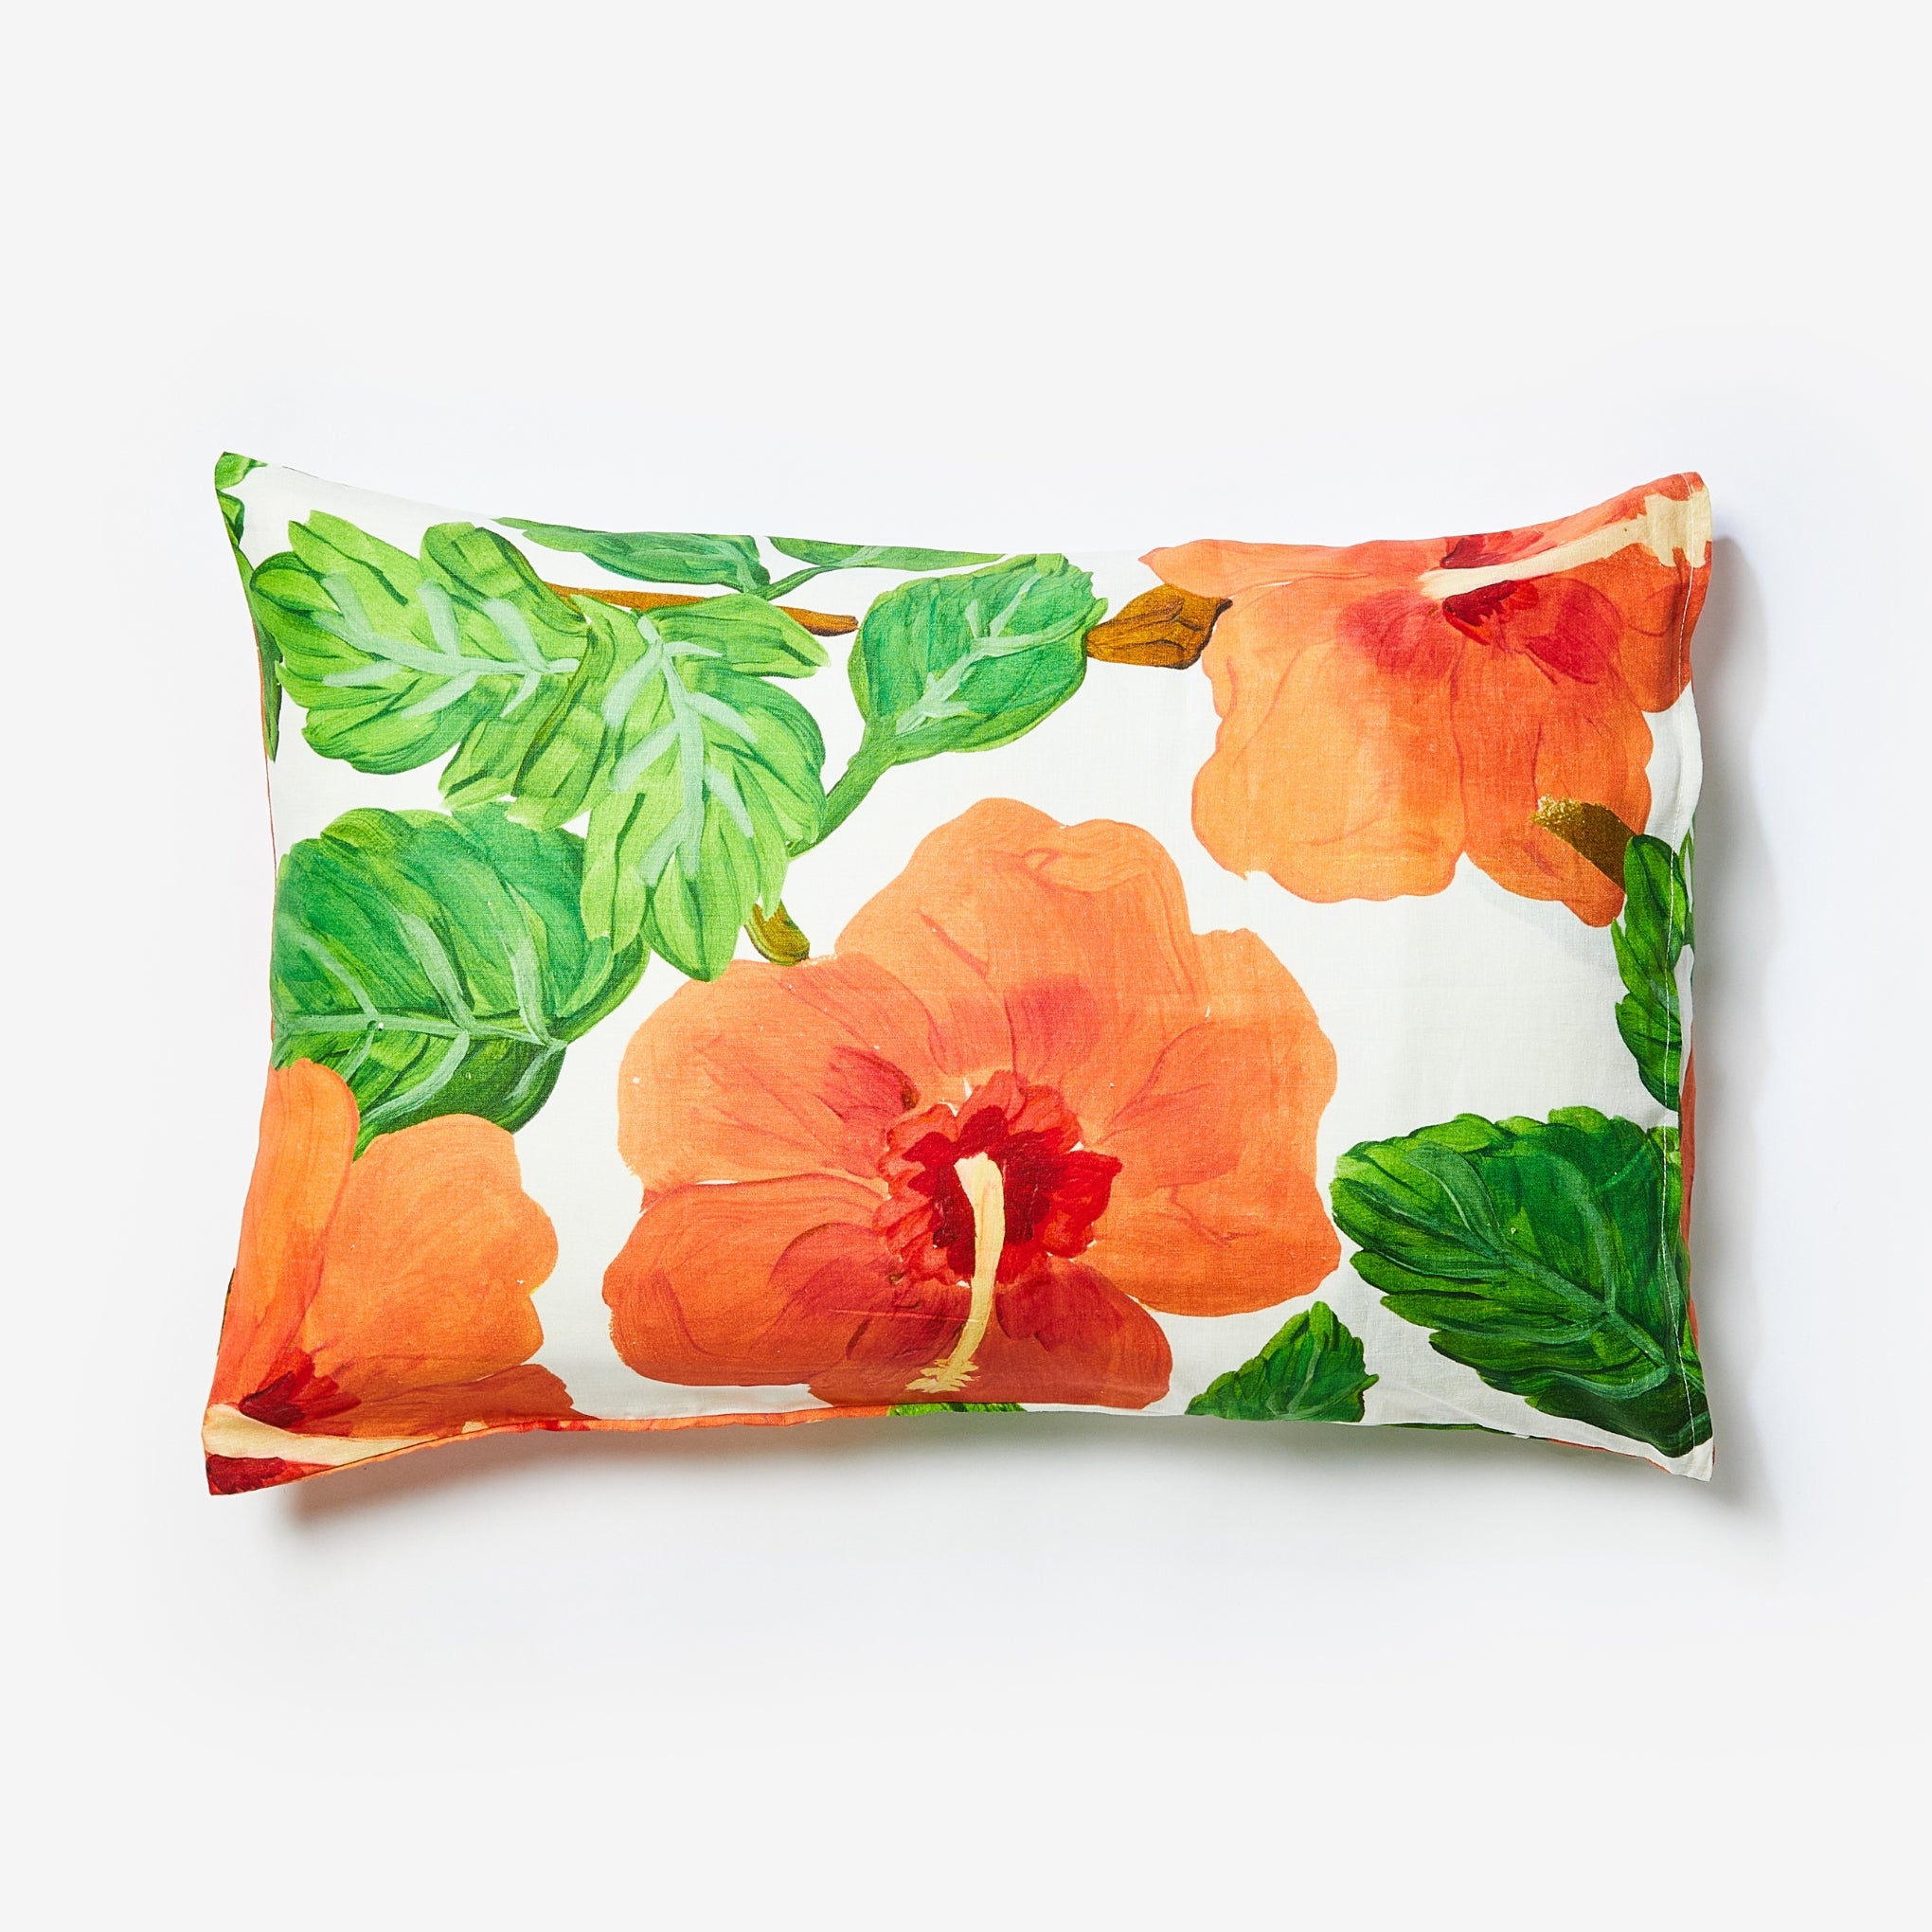 Hibiscus Coral Standard Pillowcases (set of 2)